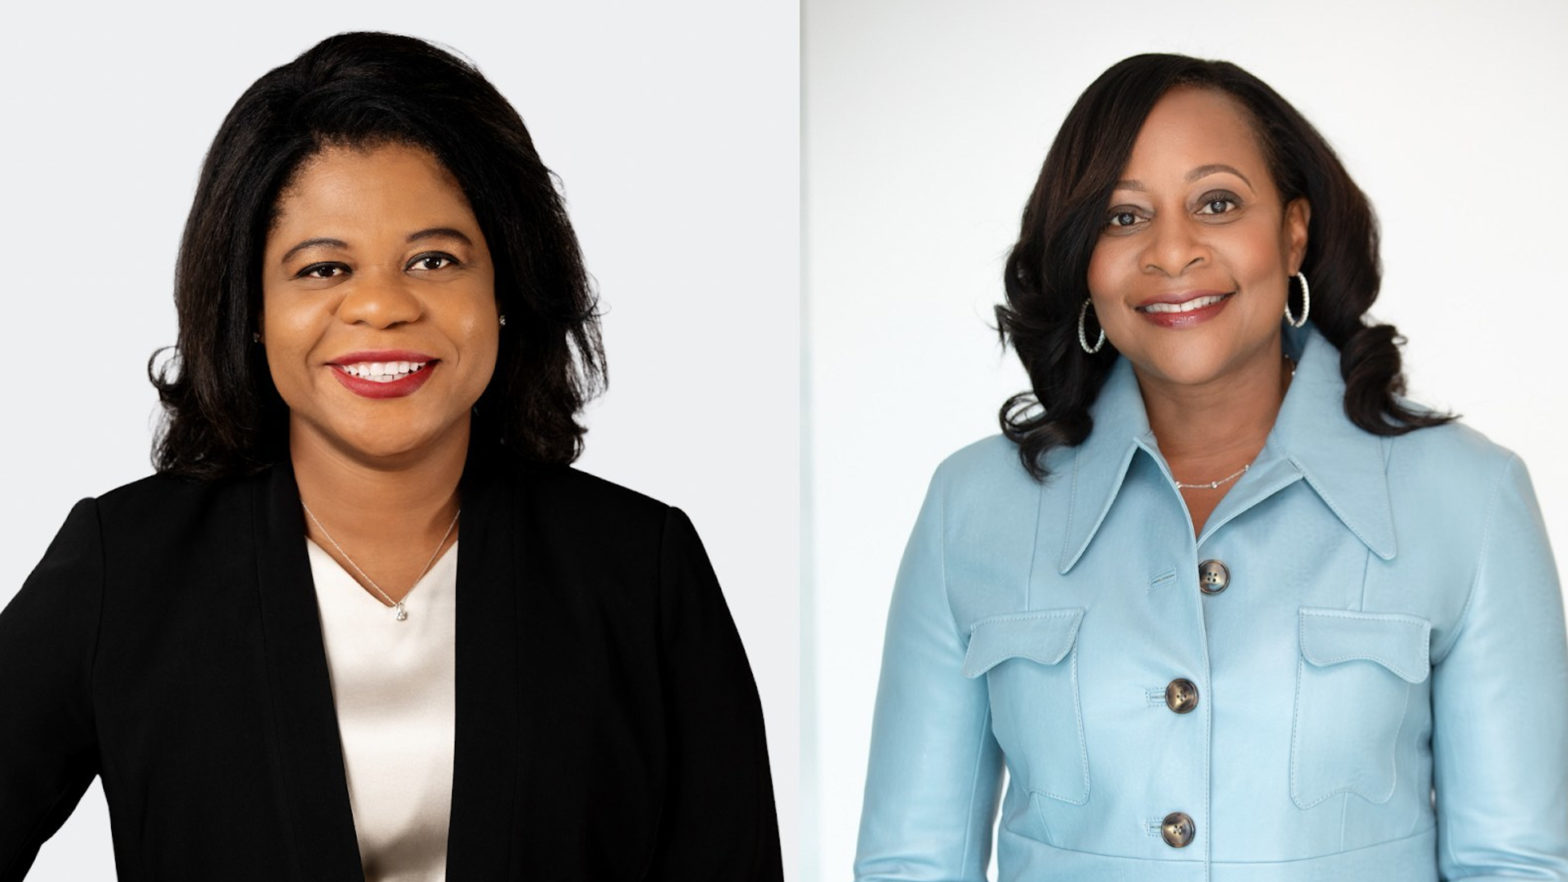 Black Women On Boards Announces Accelerator Program To Place Black Female Executives In More Board Roles